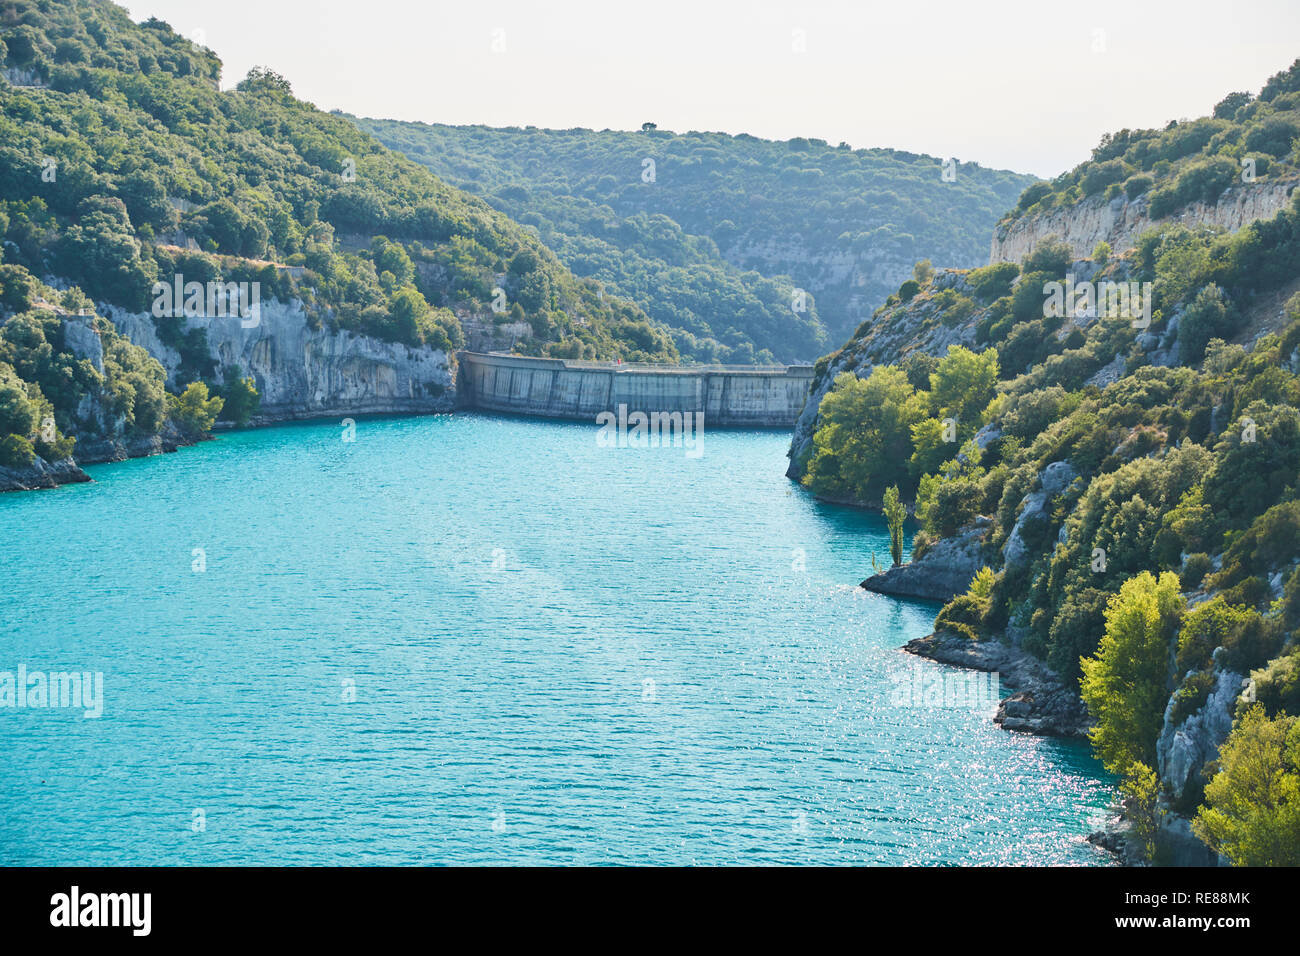 Power plant dam in France, Provence, lake Saint Cross, gorge Verdone,  azure water of the lake and slopes of mountains on a background Stock Photo